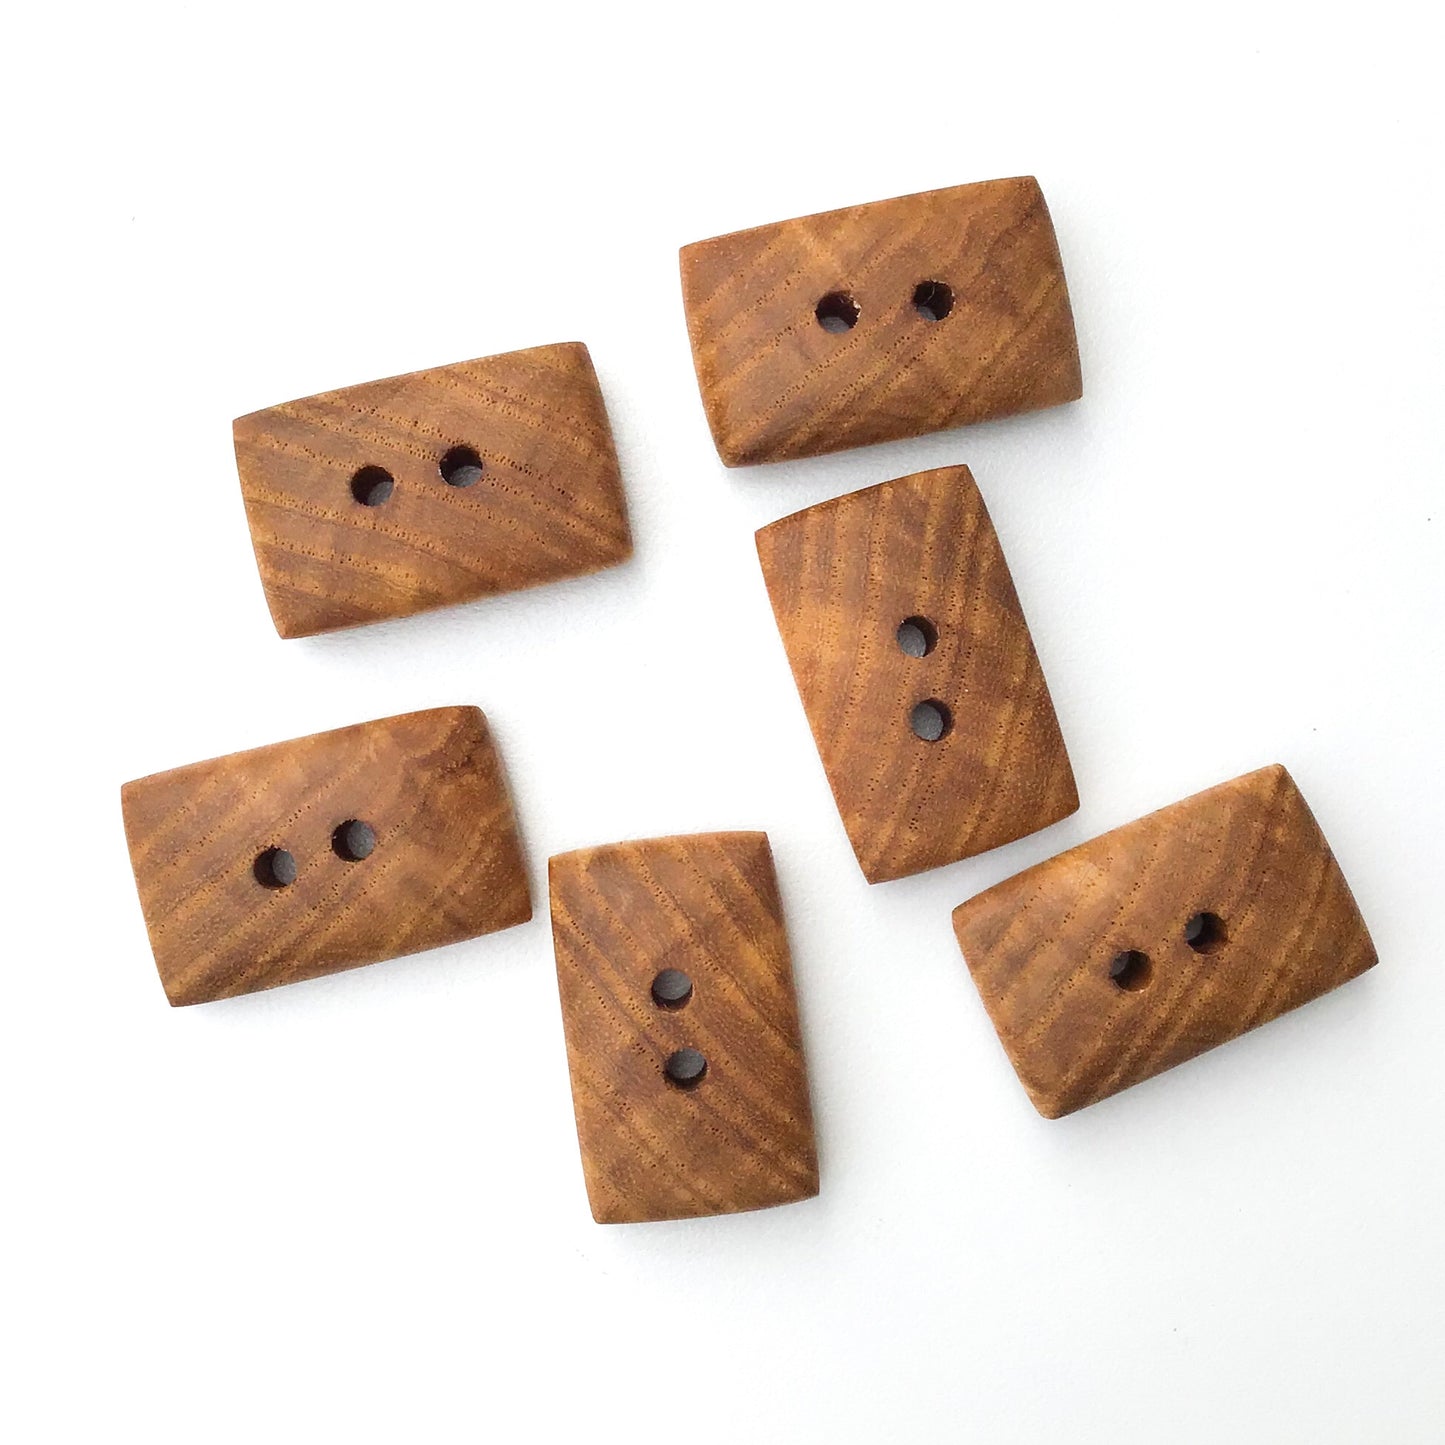 Ash Wood Buttons - Rounded Edge Rectangular Wood Buttons - 11/16" x 1 1/16" - 6 Pack